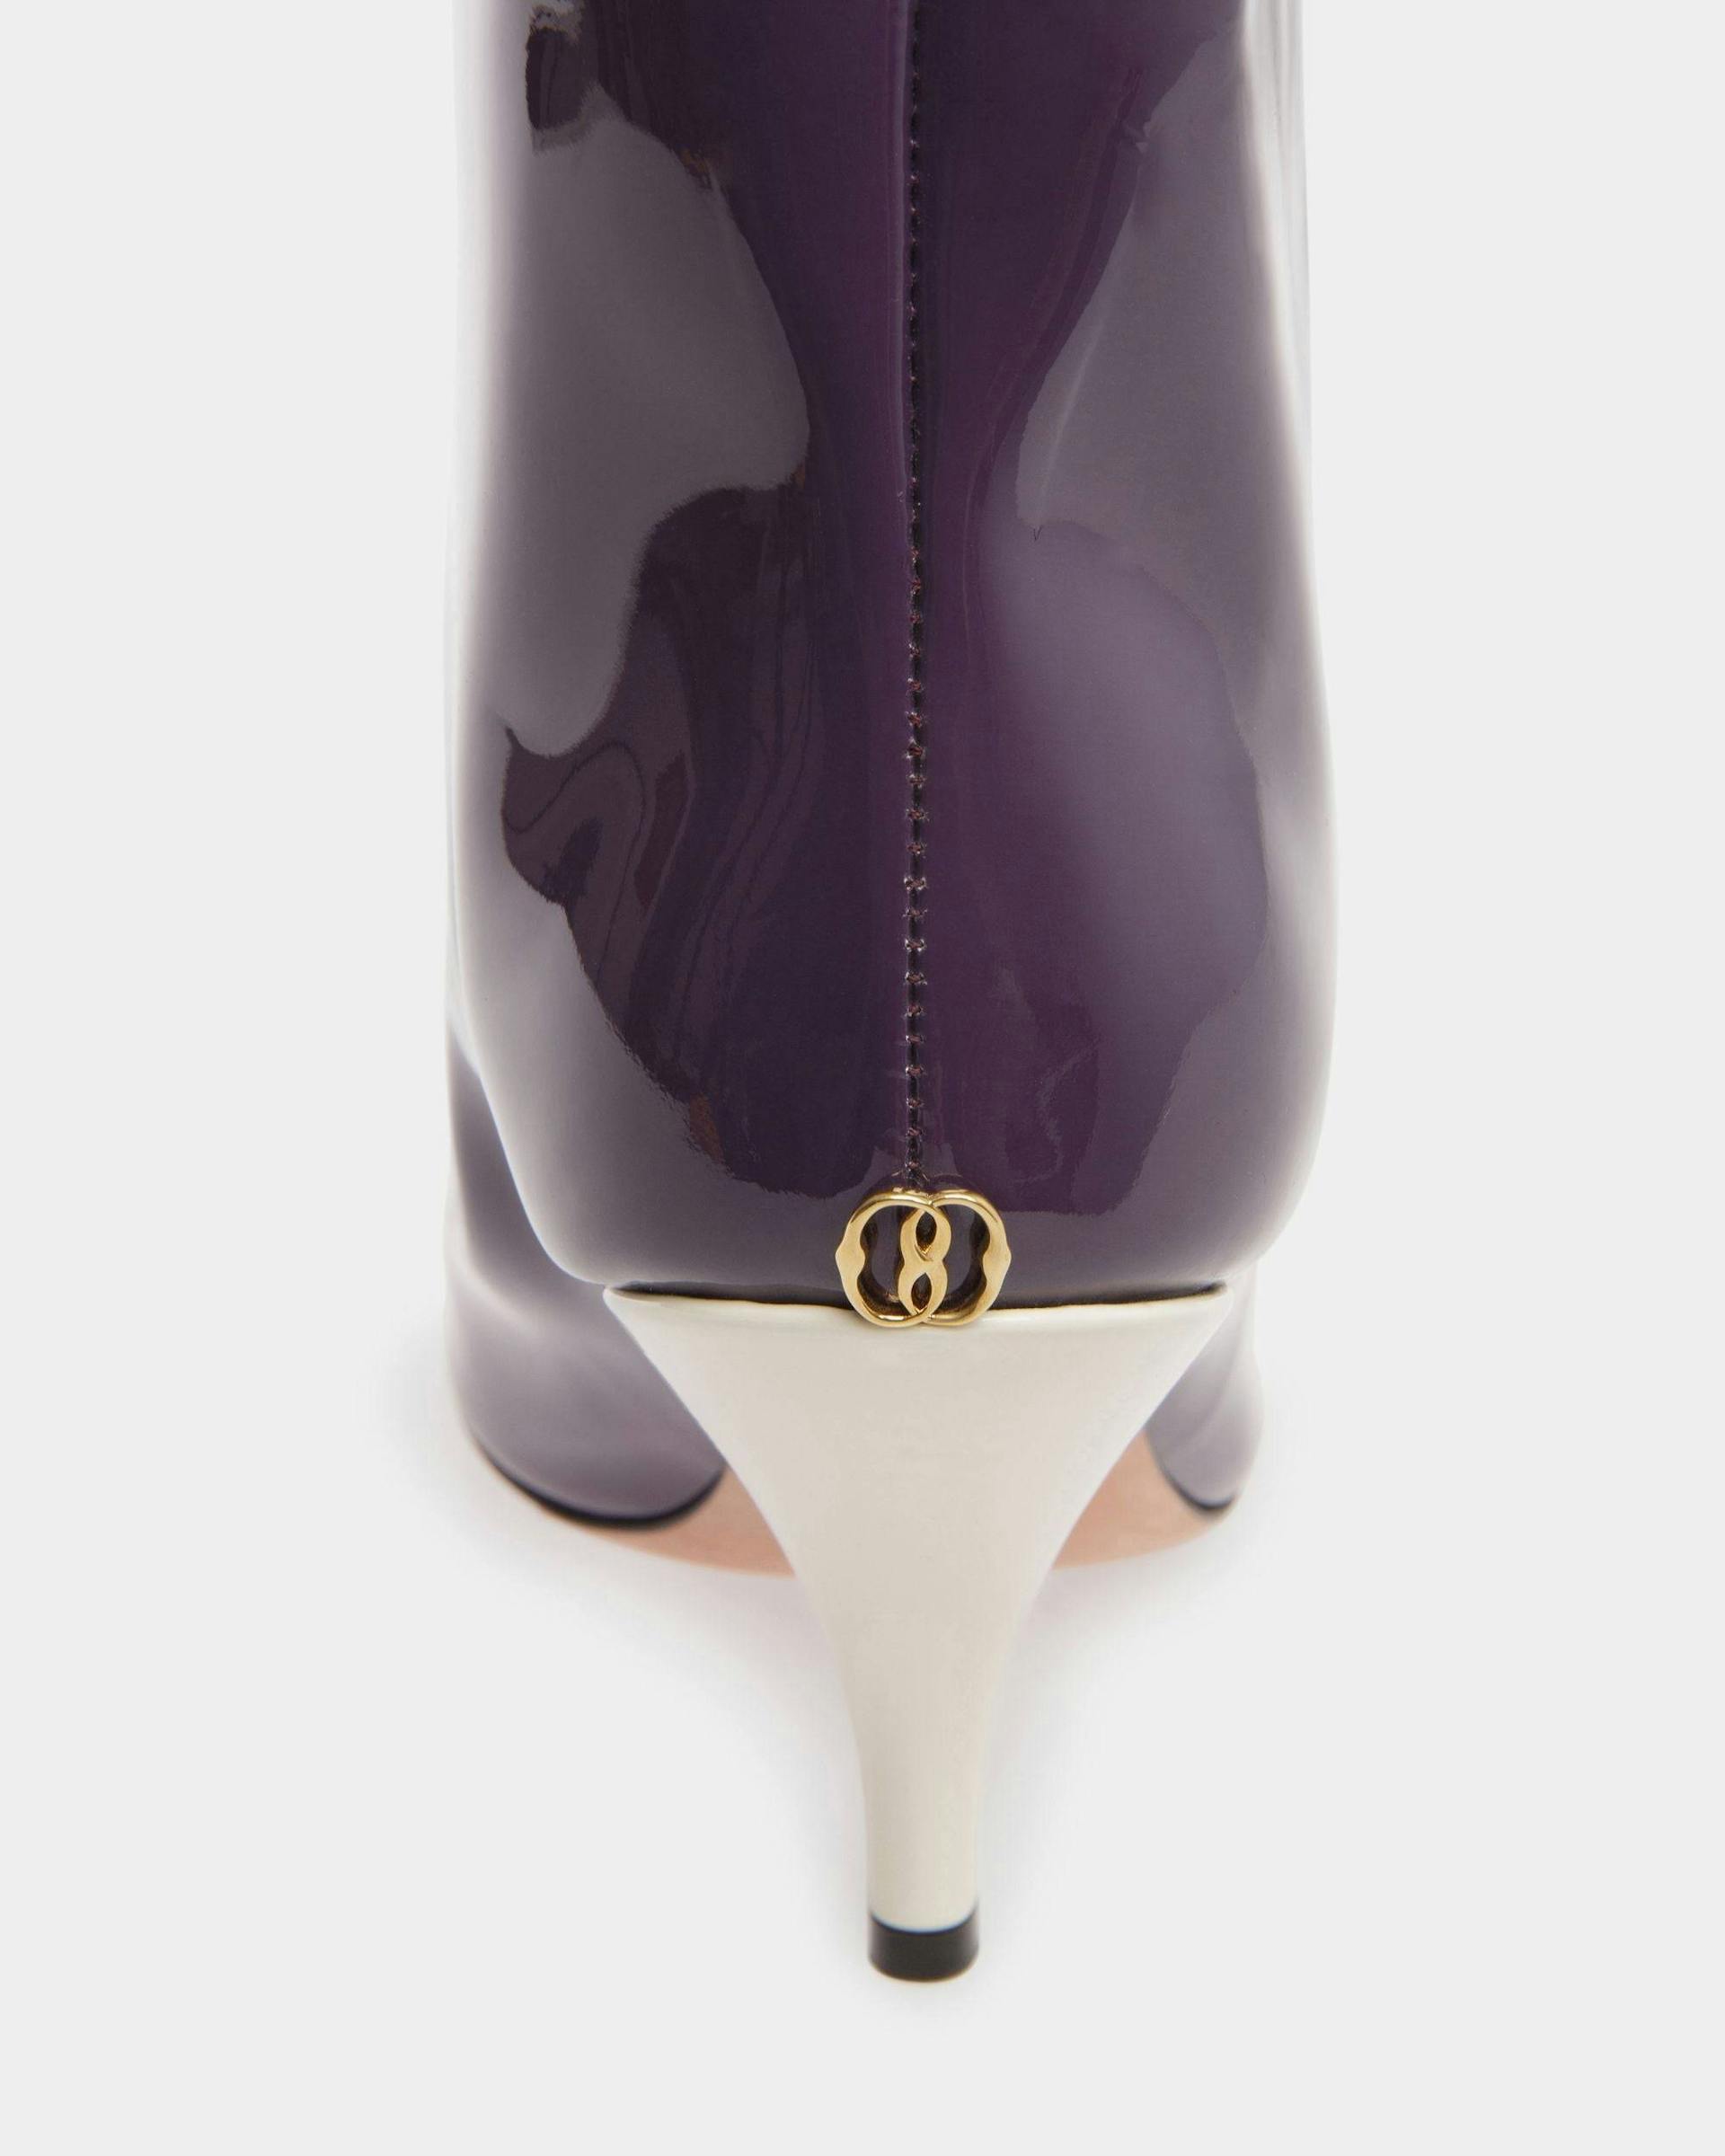 Women's Katy Long Boots In Orchid Leather | Bally | Still Life Detail